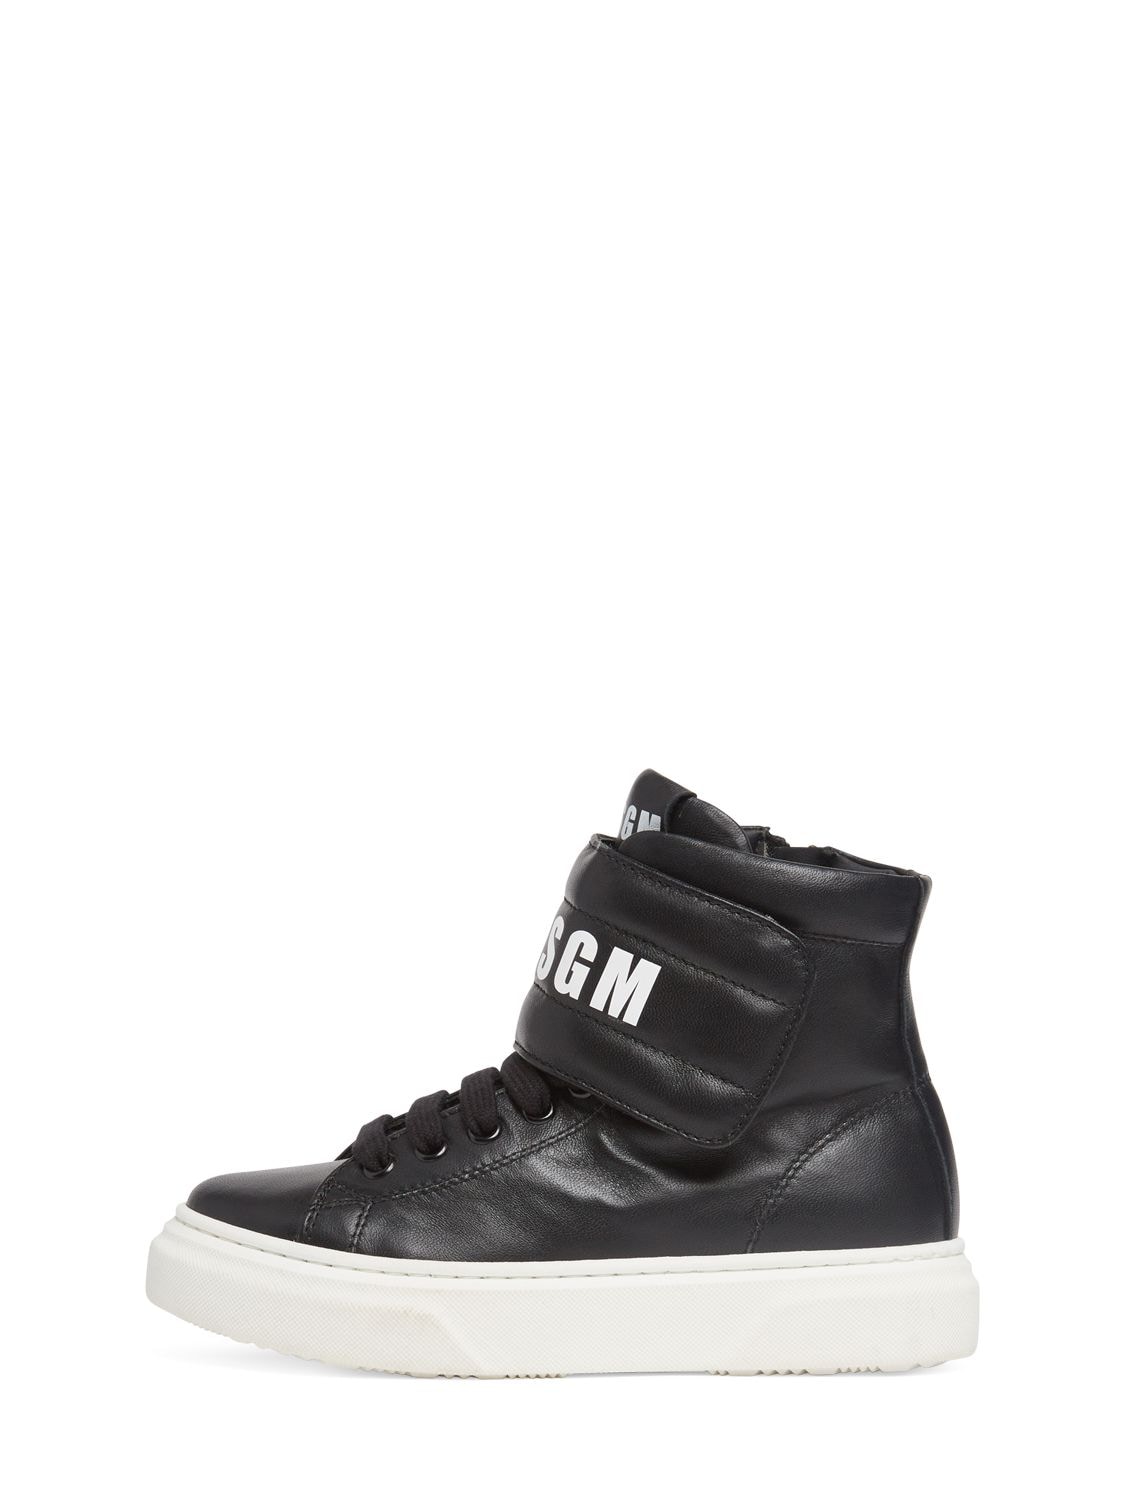 Leather High Sneakers W/ Printed Logos – KIDS-BOYS > SHOES > SNEAKERS